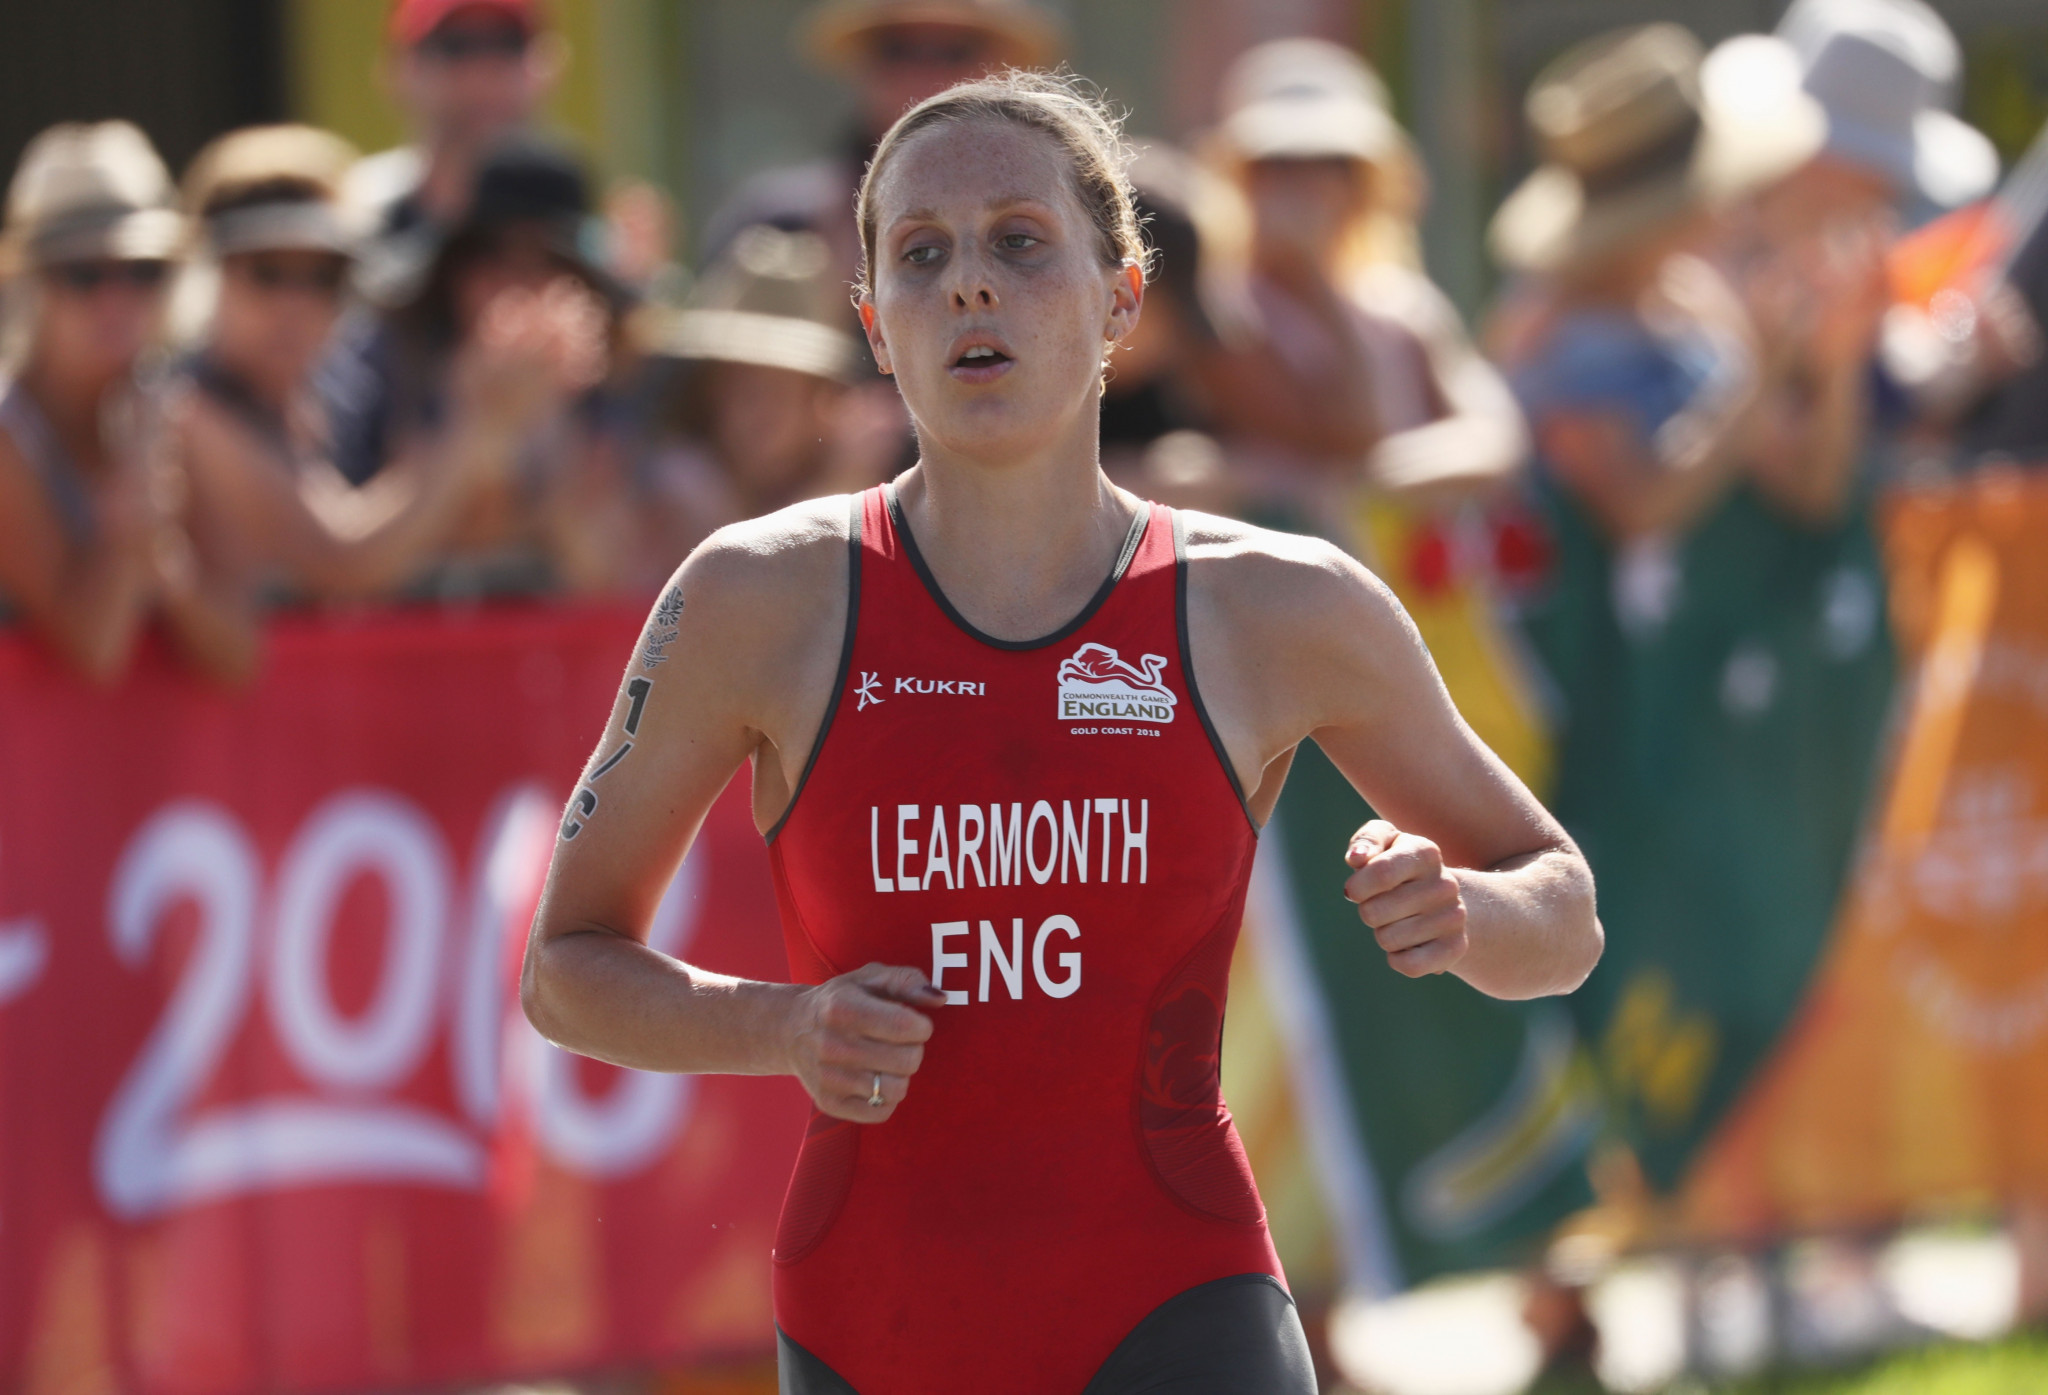 Jessica Learmonth, who won silver at the 2018 Commonwealth Games in Australia, will look to defend her European title in Glasgow tomorrow ©Getty Images